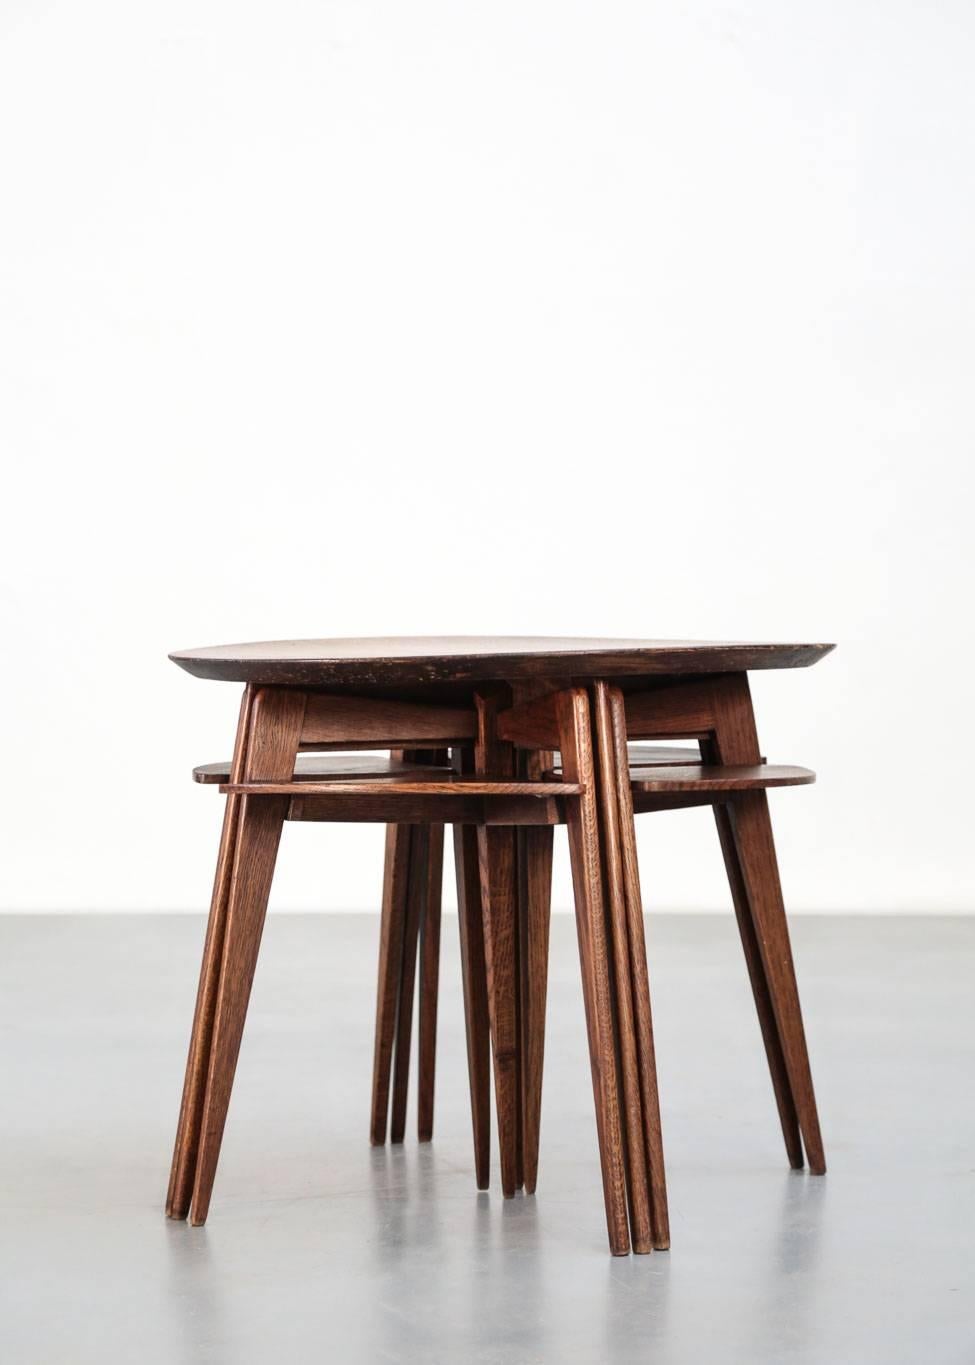 Rare nesting tables made of oak with four tripods Gigognes
One restoration in one small board.
   